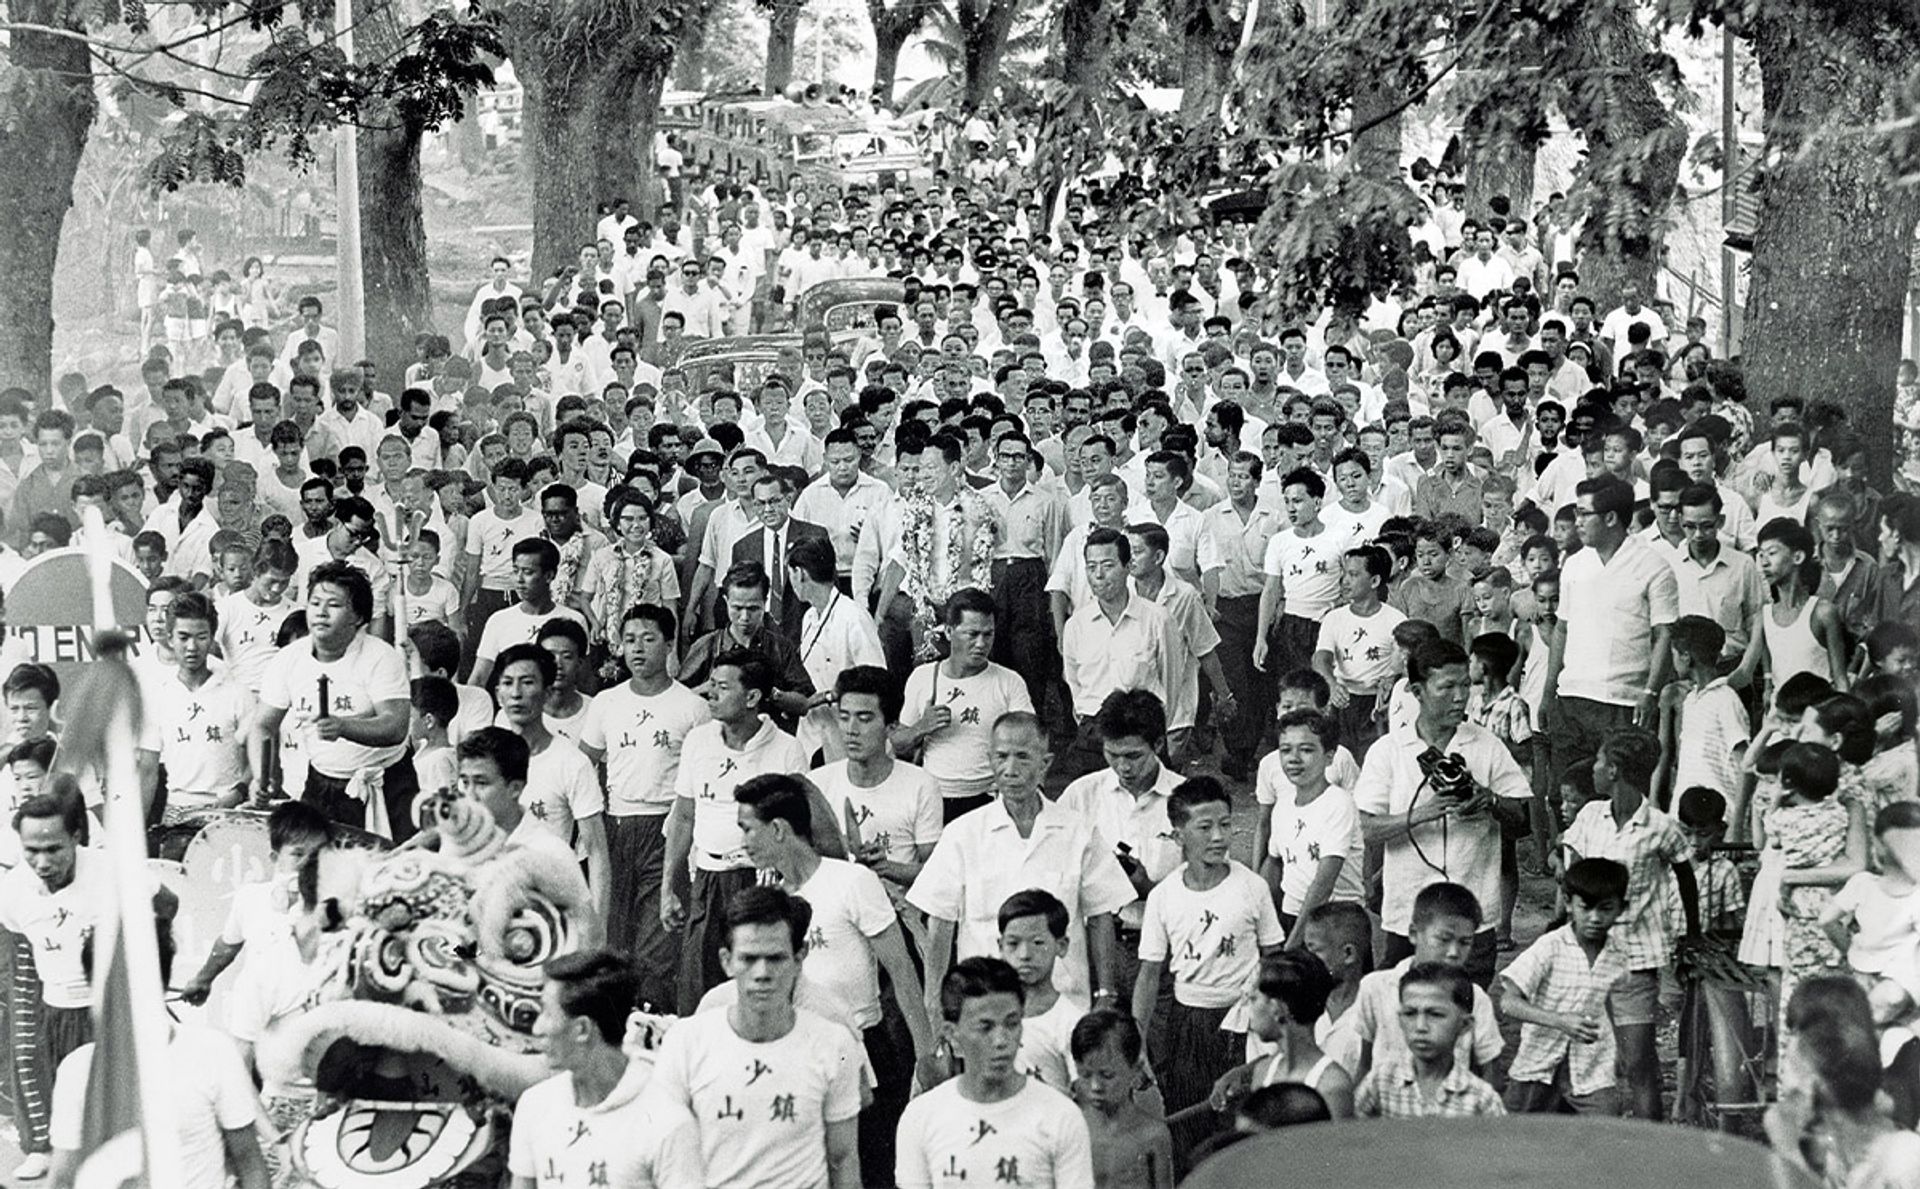 Mr Lee (centre, garlanded) during a walkabout in Tanjong Pagar constituency between 1962 and 1963. Source: People’s Action Party